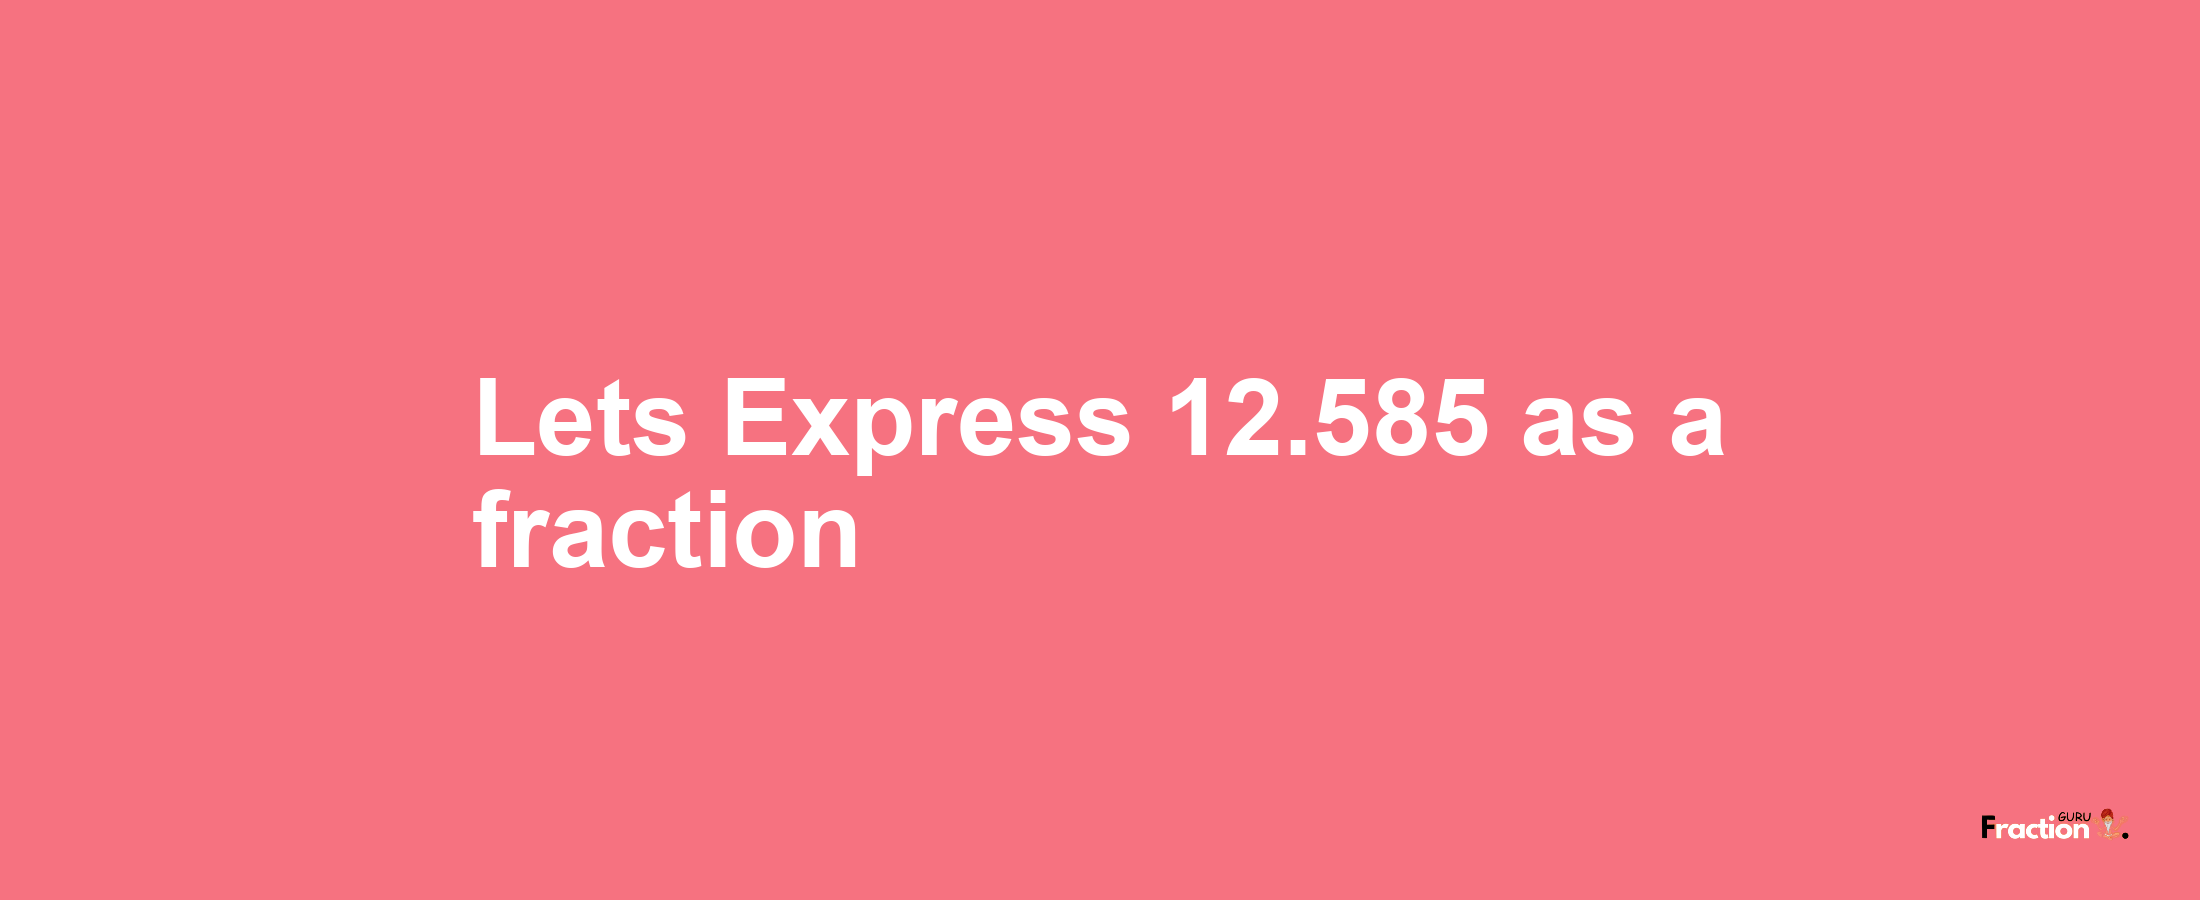 Lets Express 12.585 as afraction